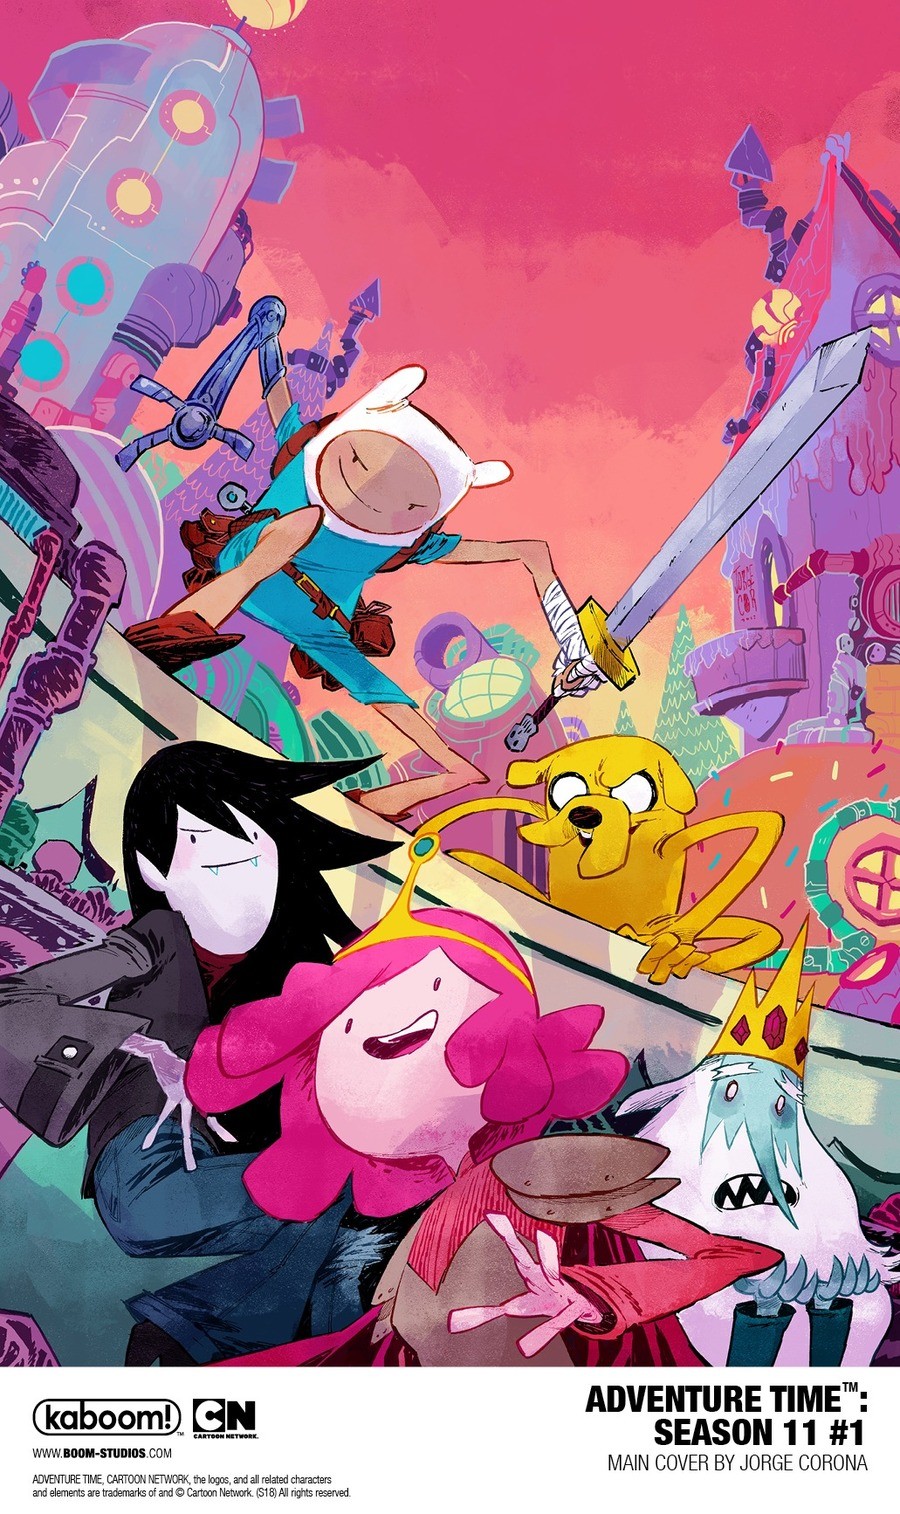 Adventure Time is not over!. .. jesus christ the first picture is so radical